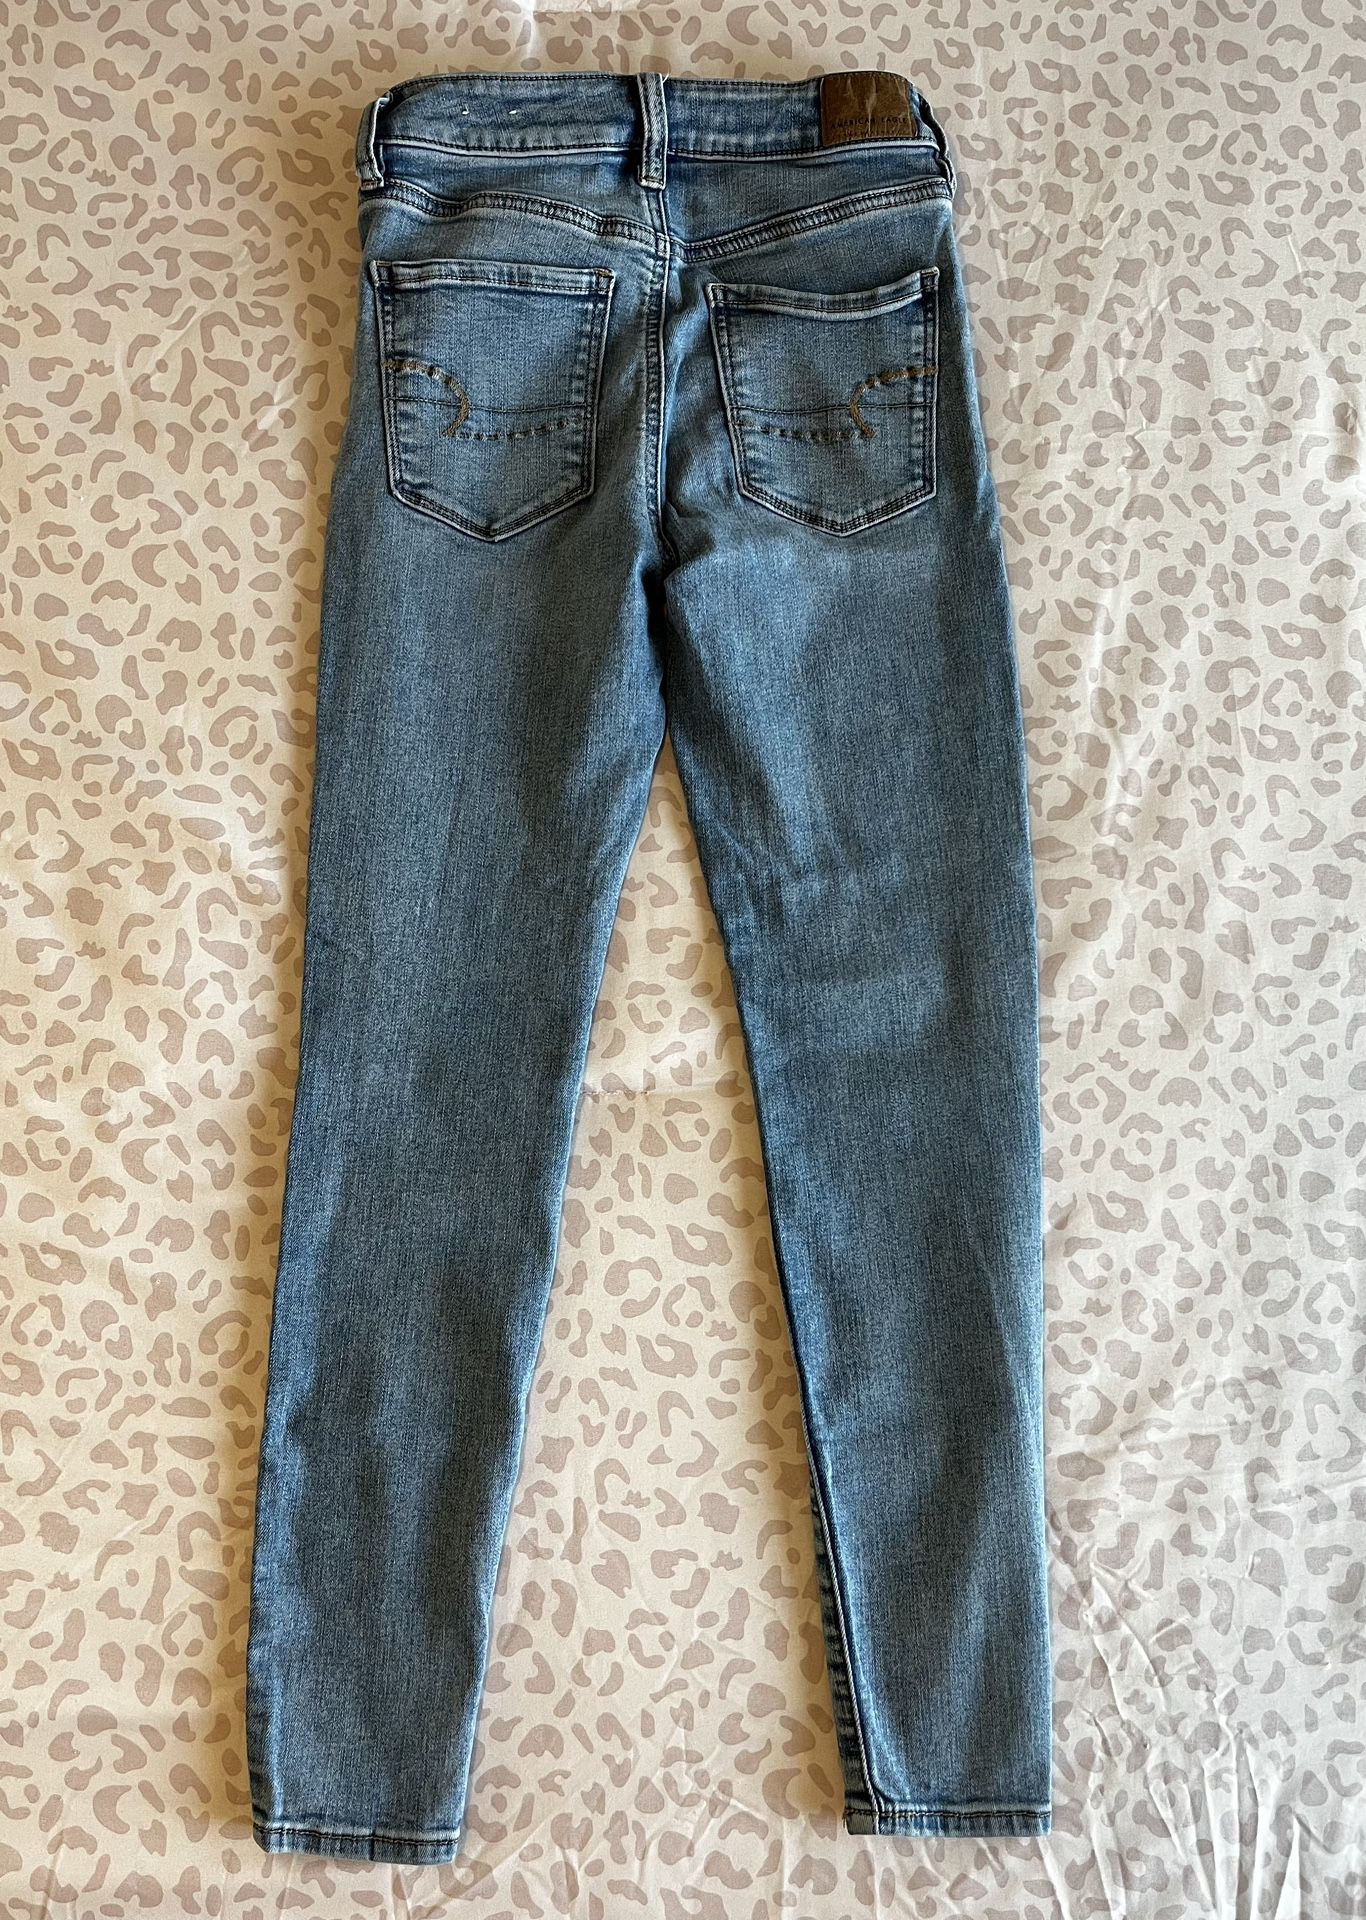 American Eagle Jeans Size 2 for Sale in San Antonio, TX - OfferUp